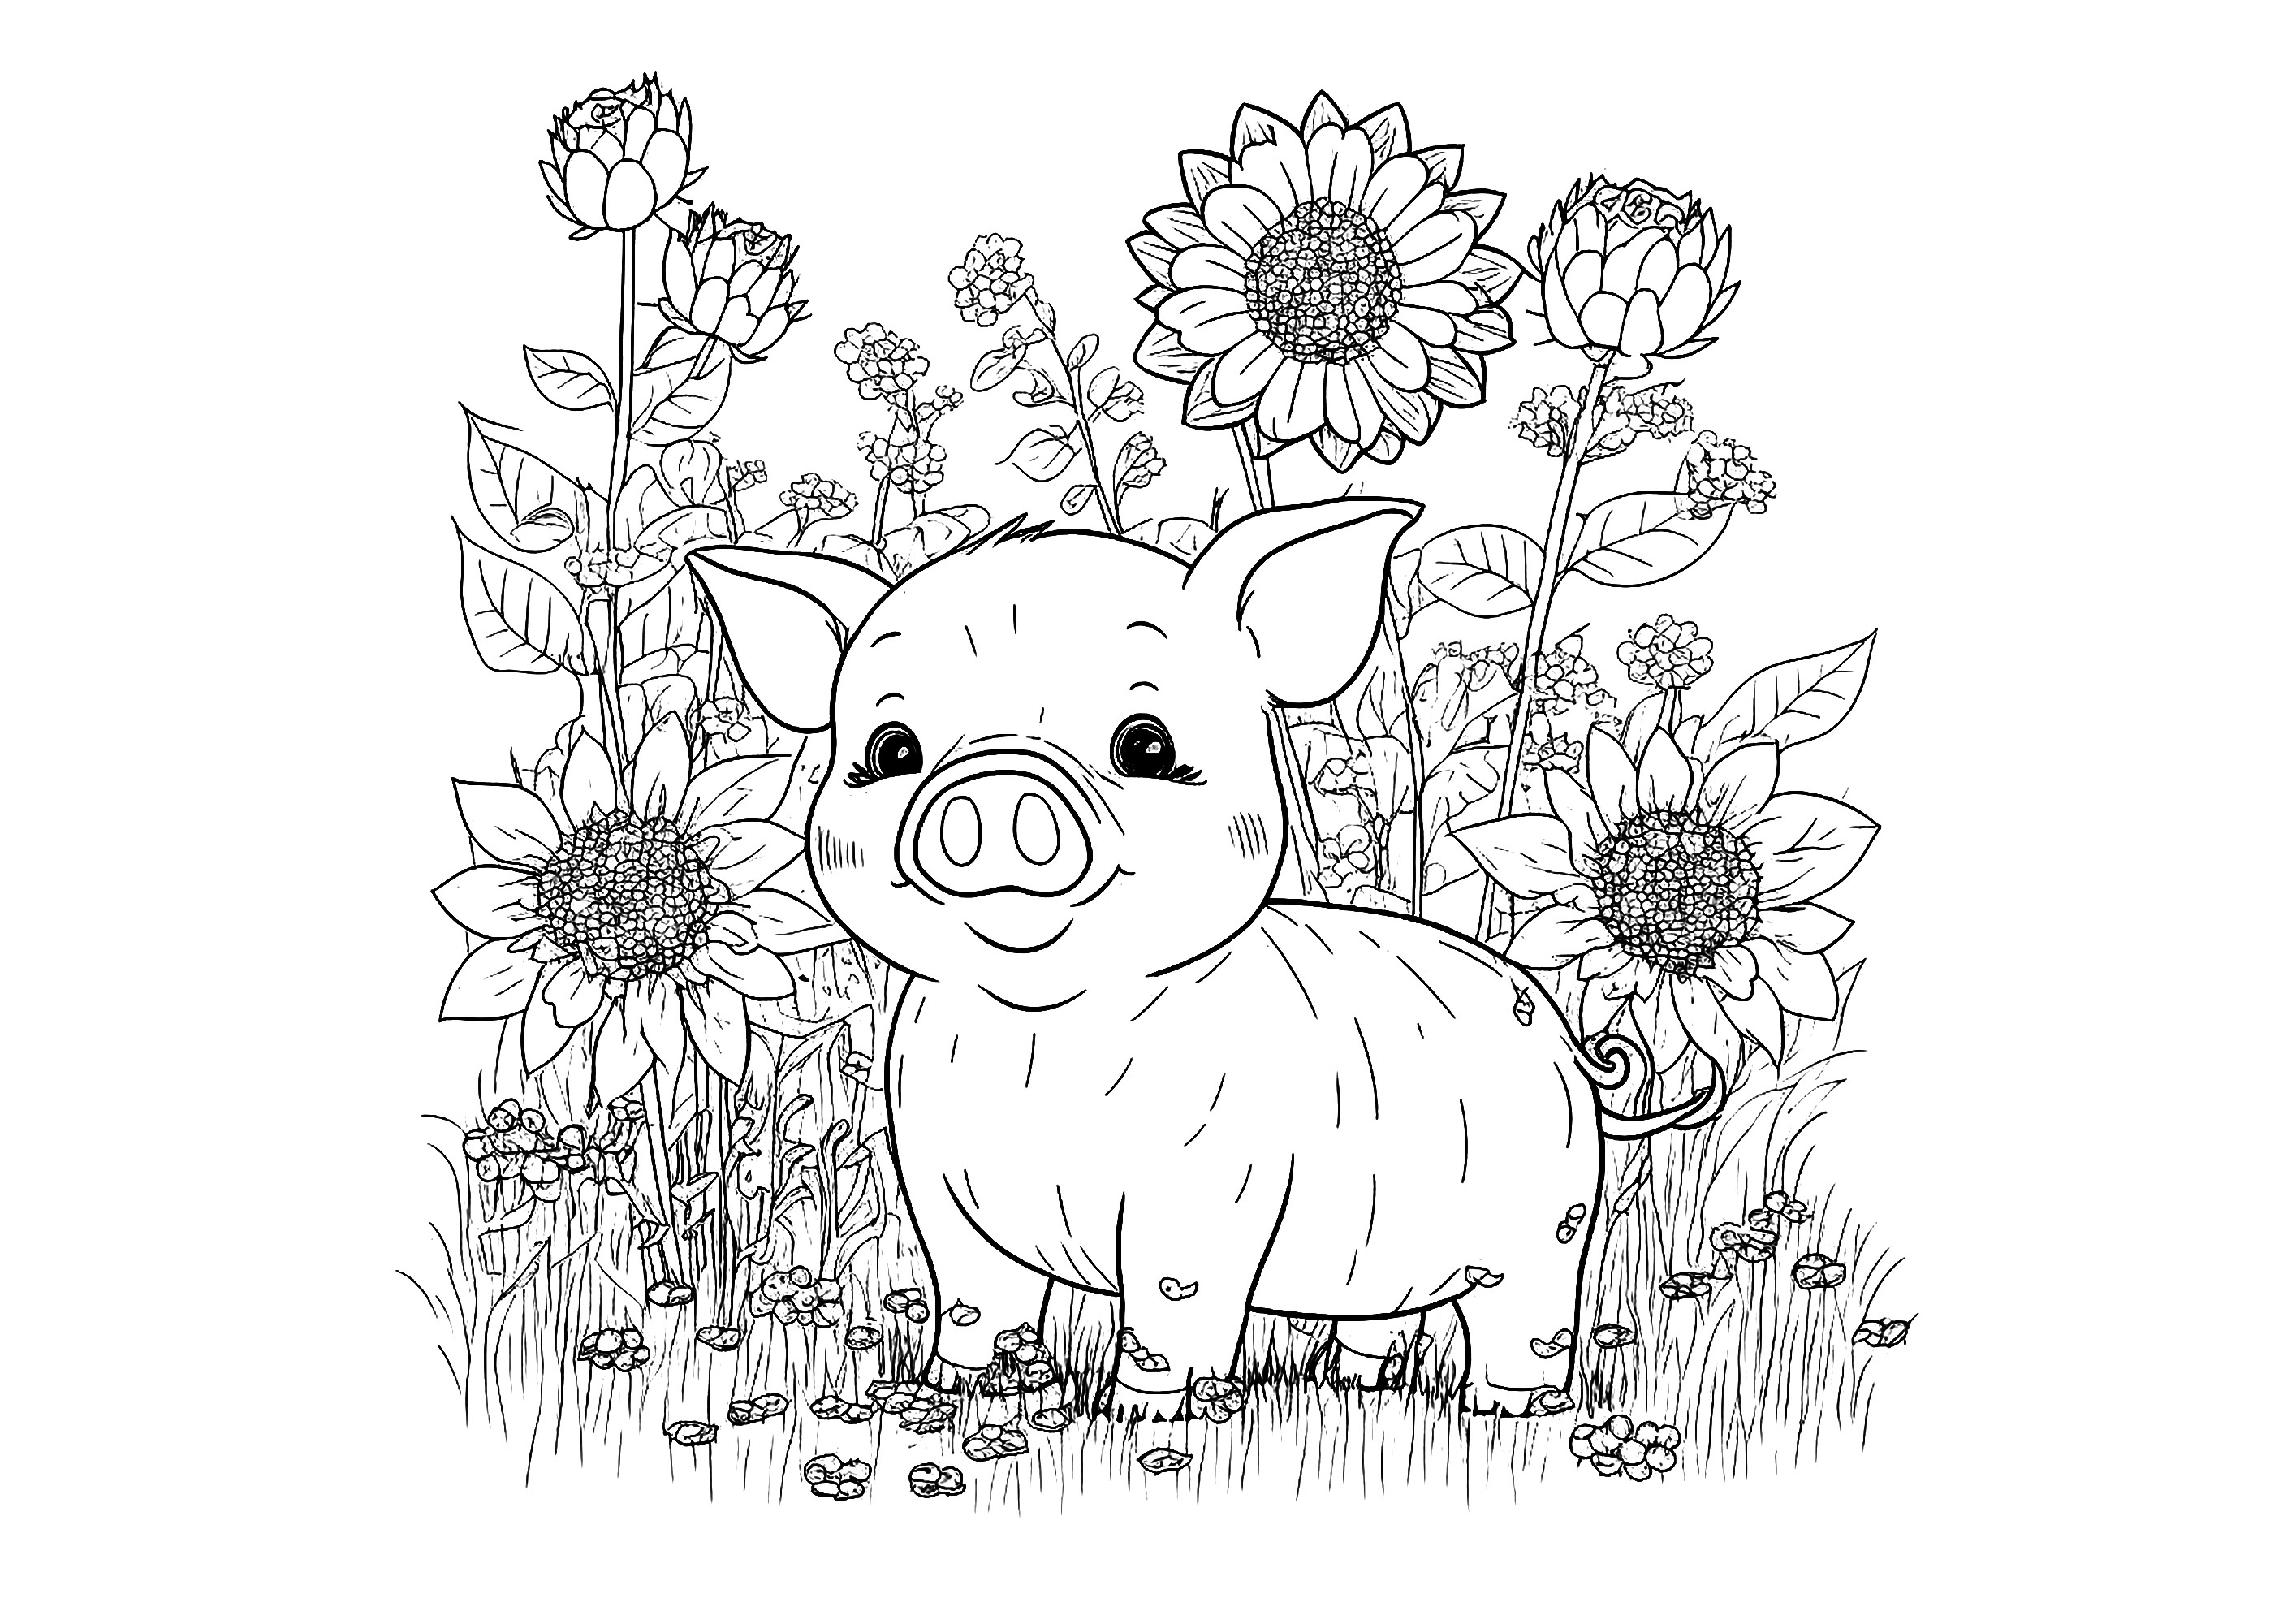 A pig with pretty flowers in the background